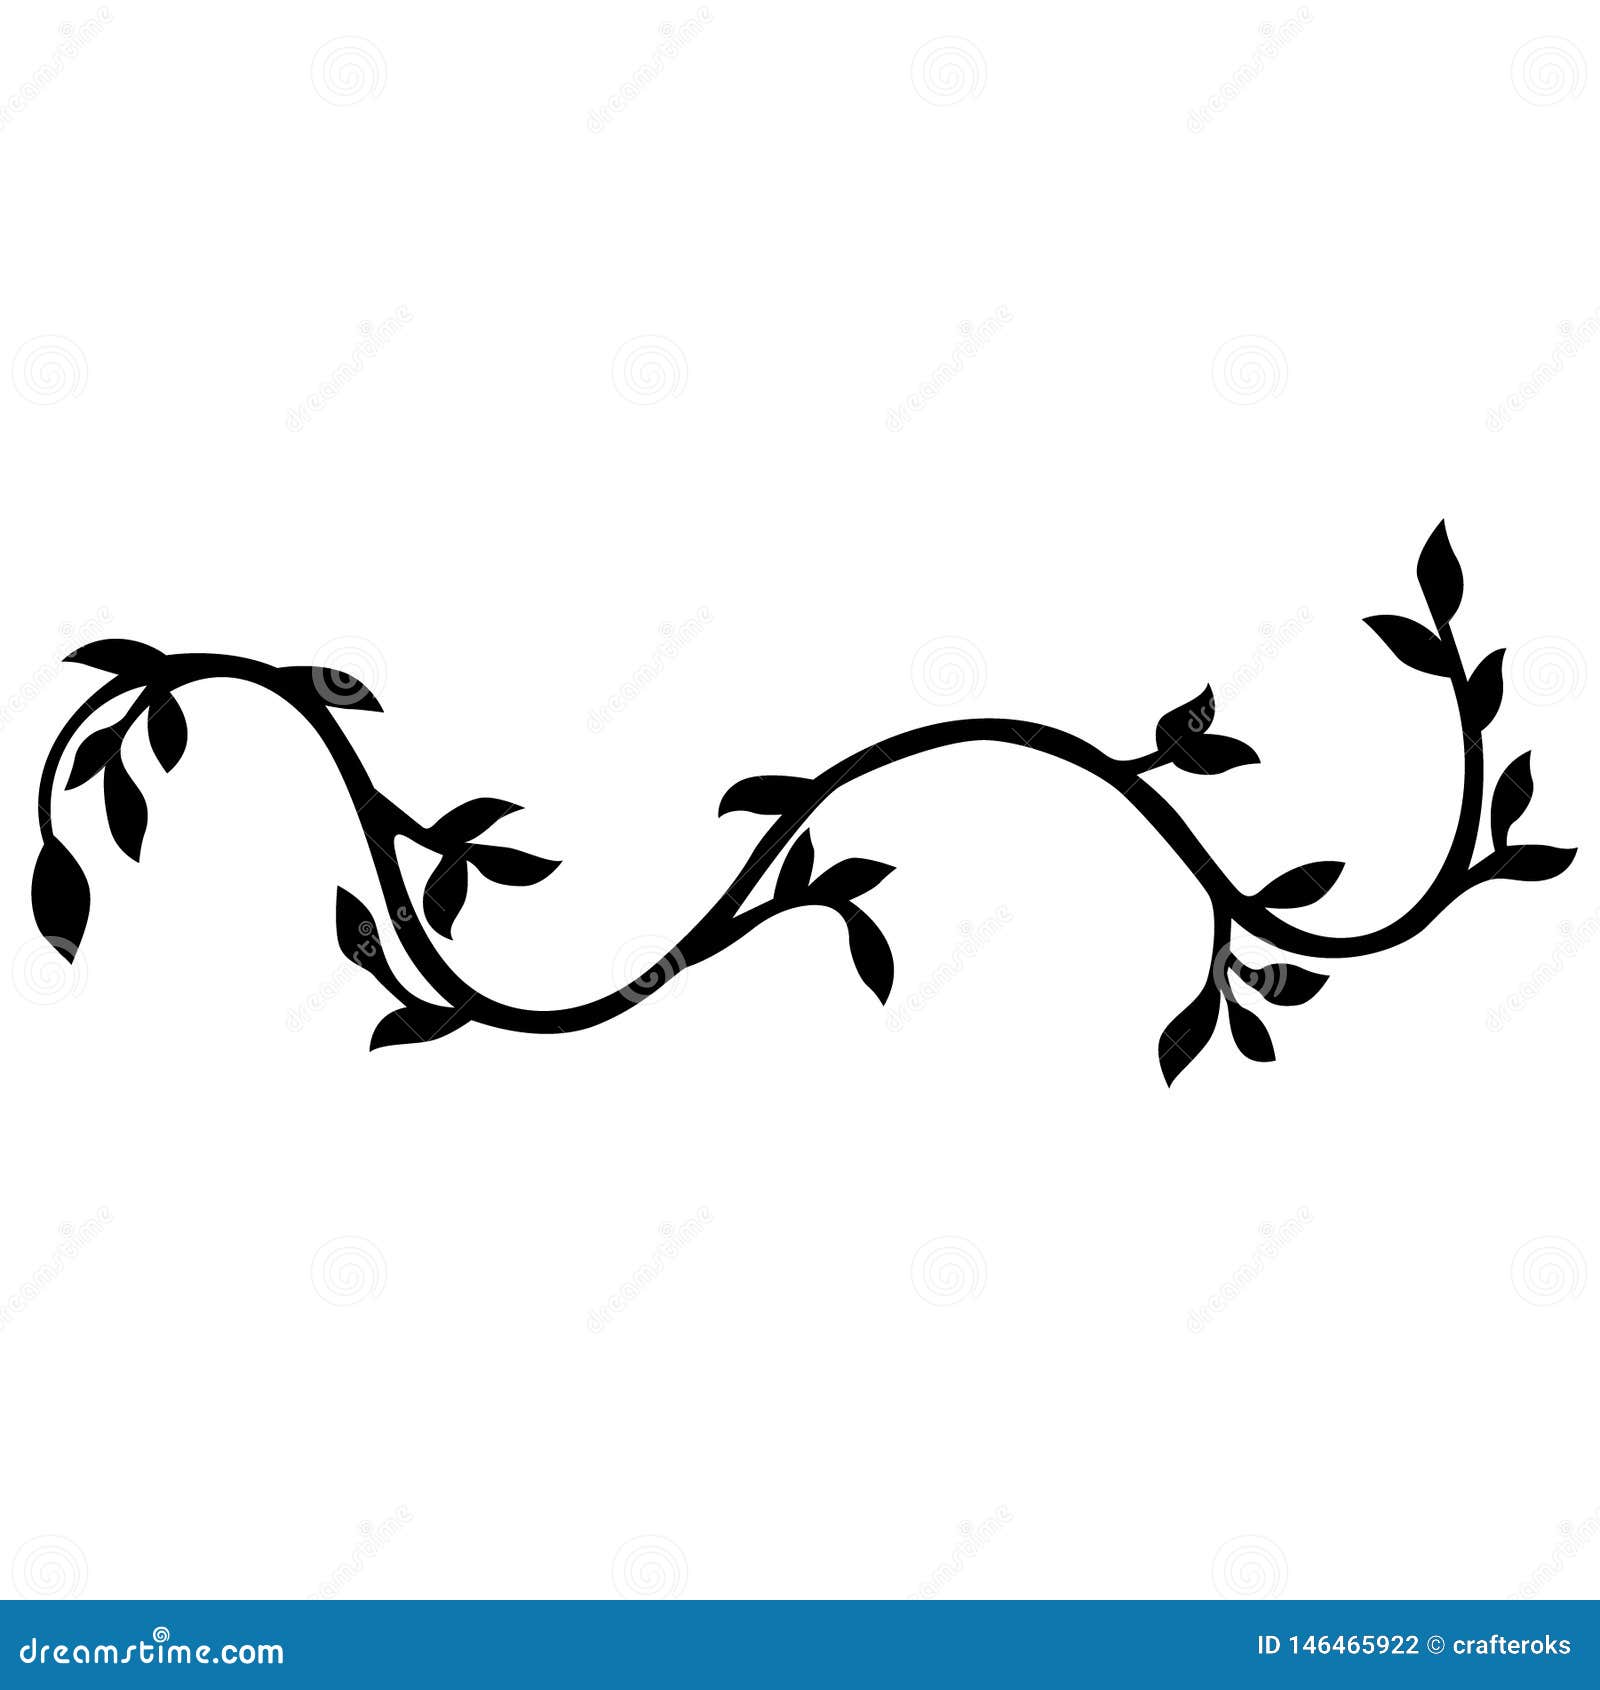 Download Decorative Vines Vector Eps Hand Drawn, Vector, Eps, Logo, Icon, Silhouette Illustration By ...